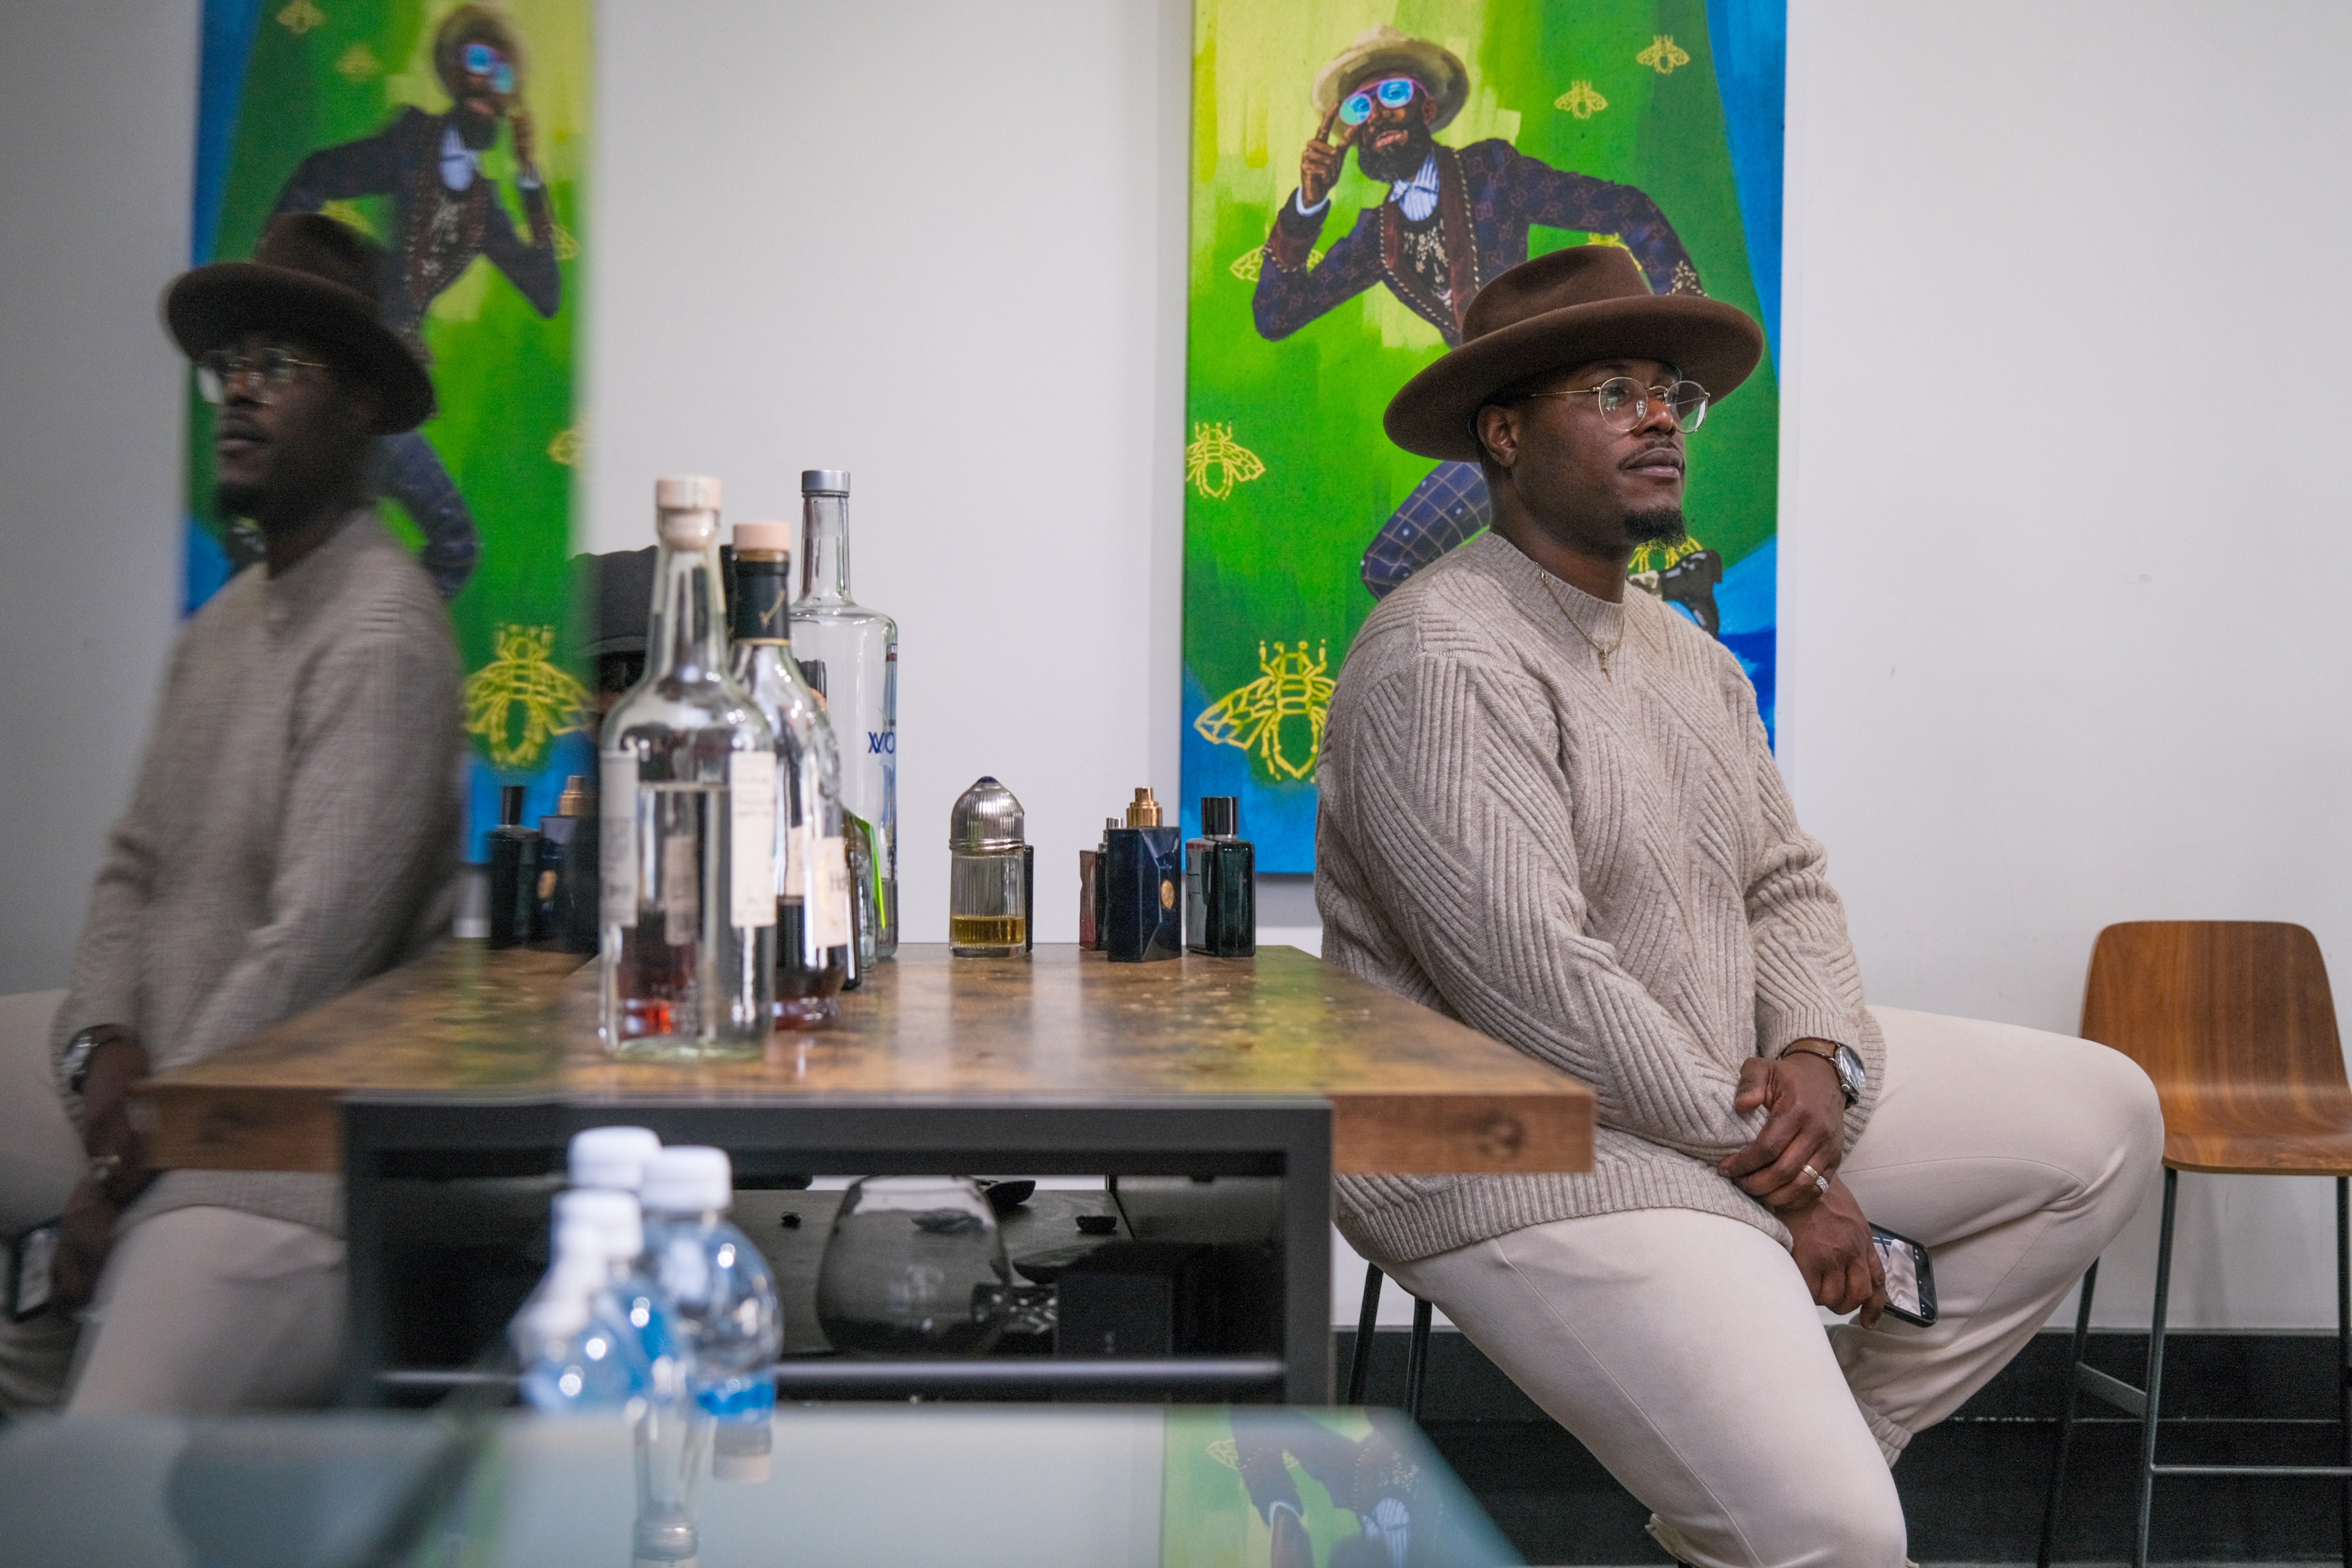 A man in a hat sits near a table with bottles, his reflection visible, and vibrant art hangs behind.